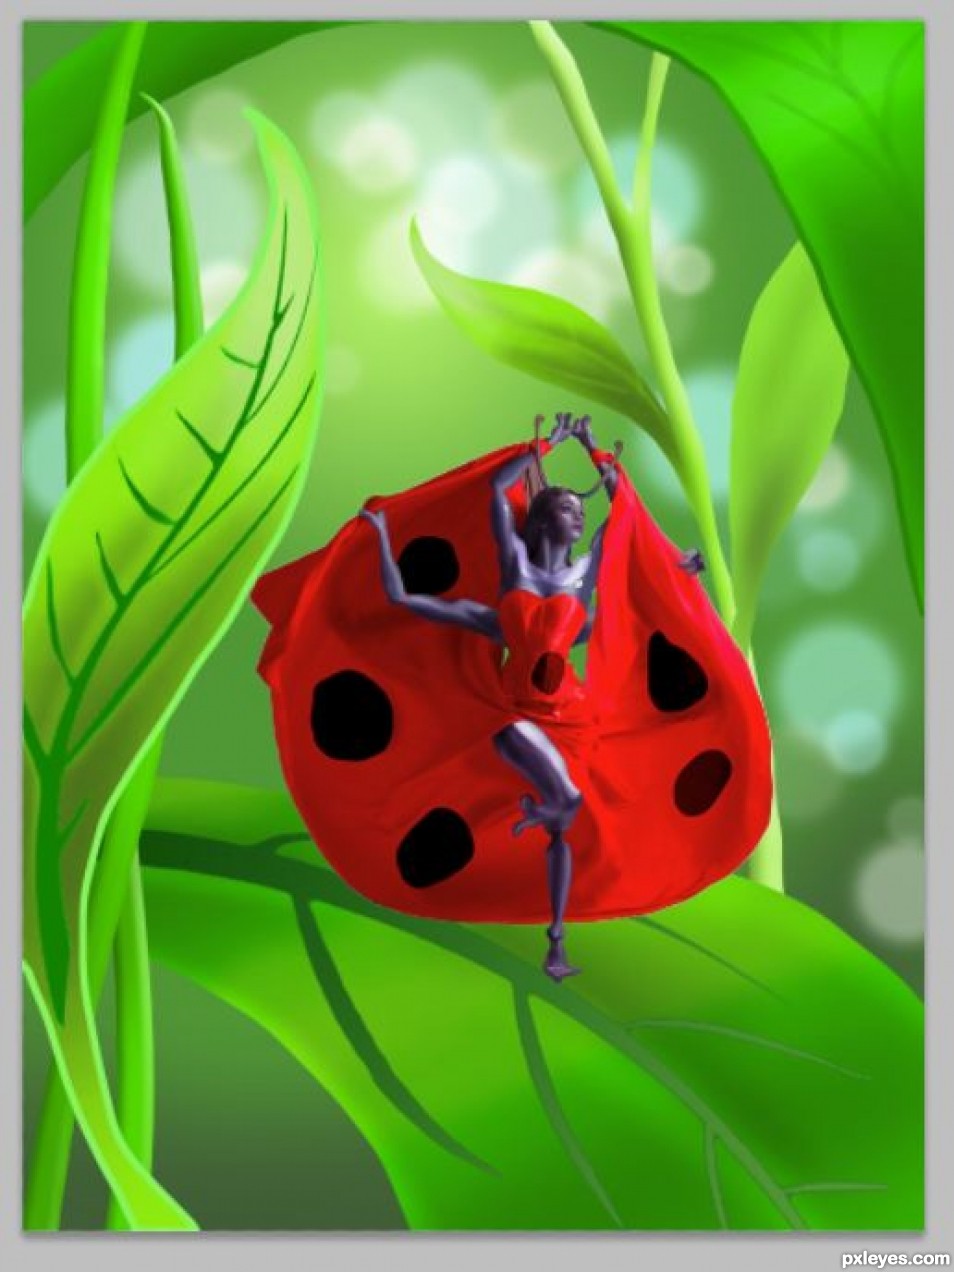 Creation of Does this lady bug you?: Step 8